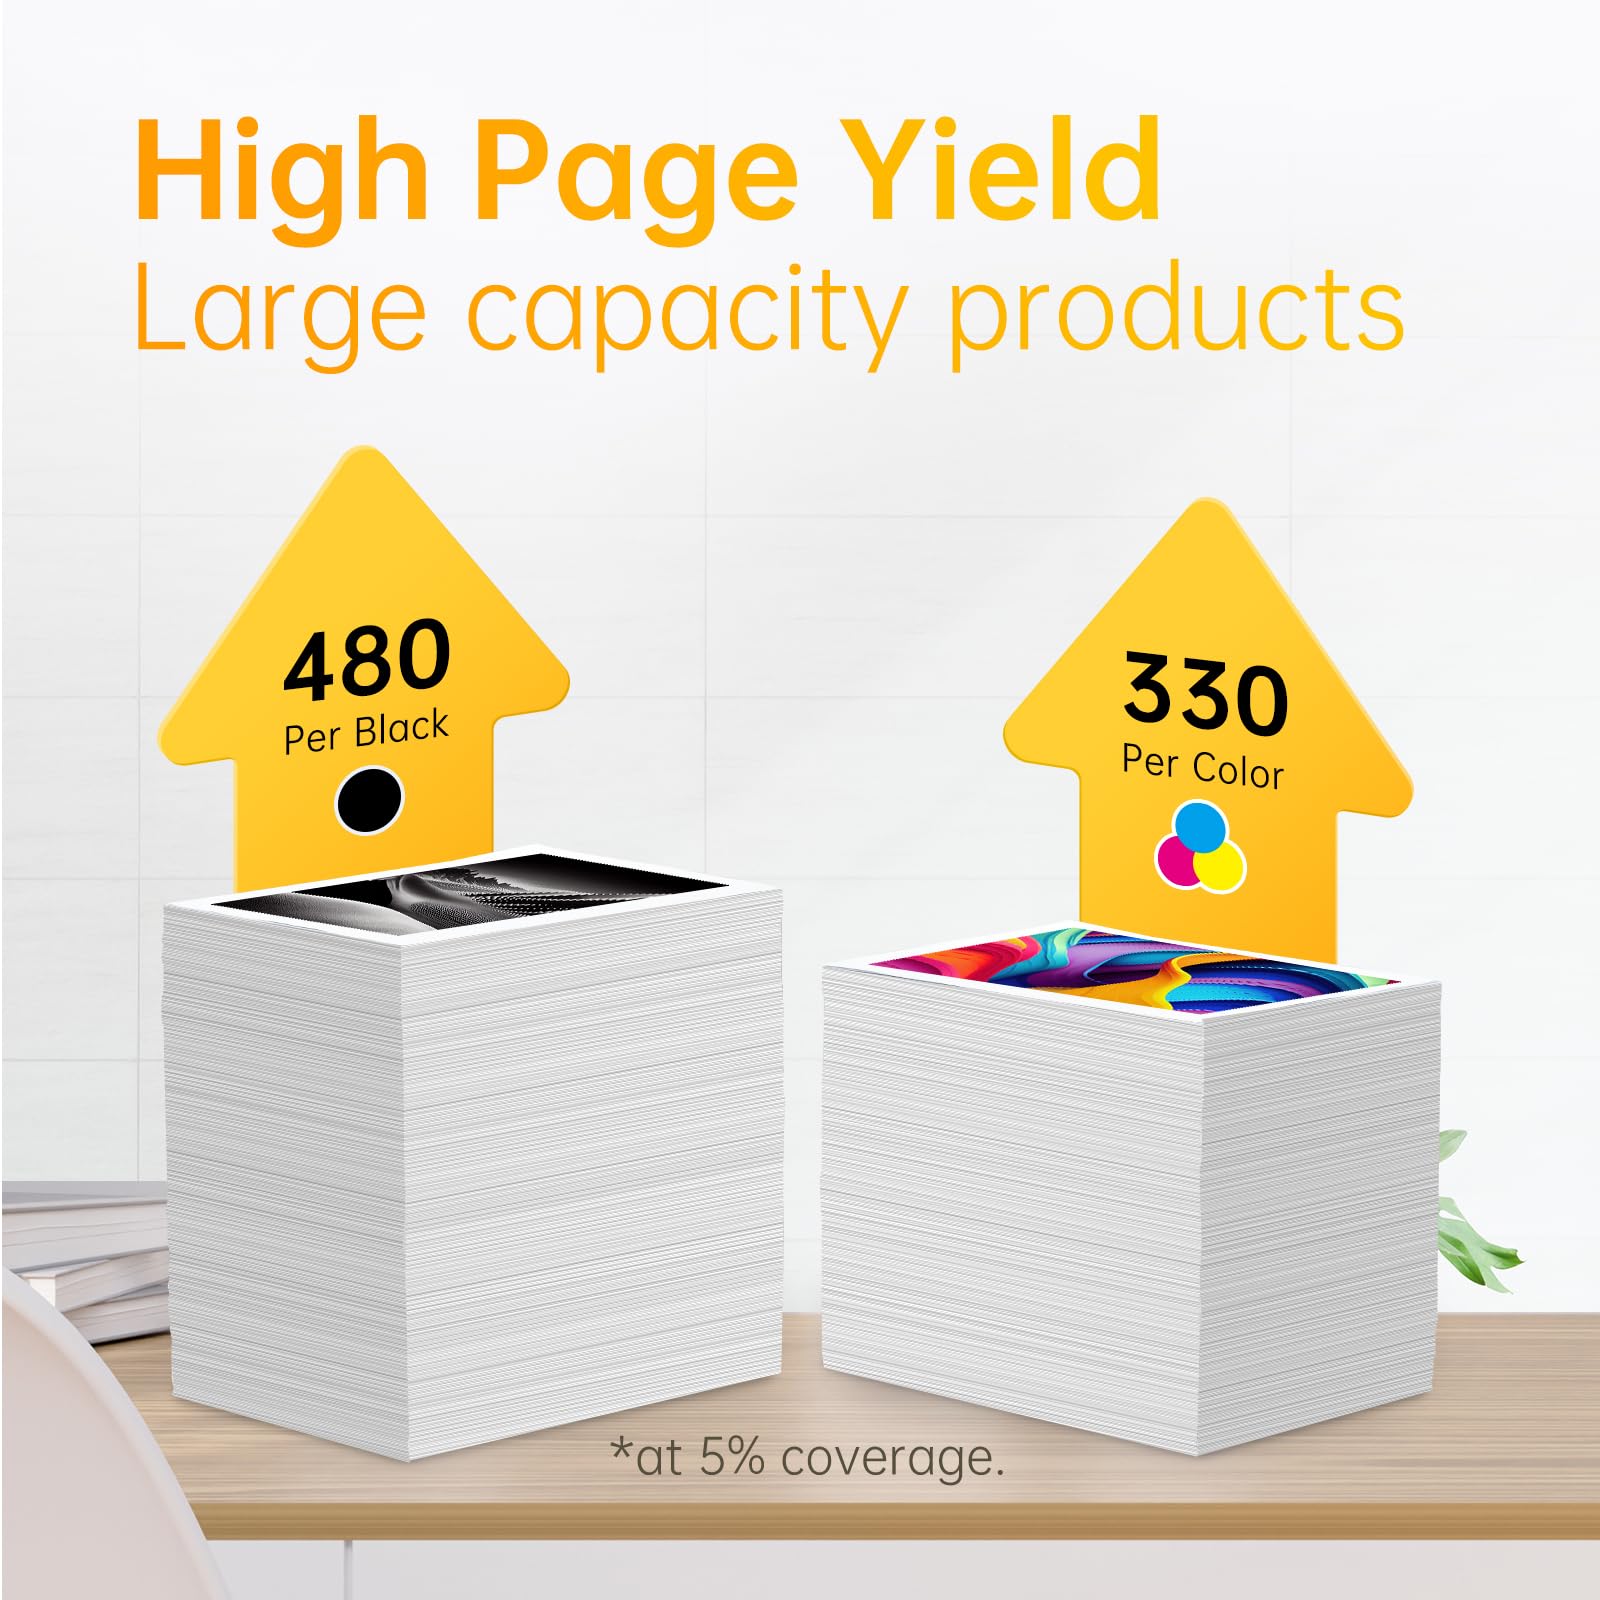 High Page Yield, Large Capacity Products" for LEMERO HP 61XL Ink Cartridges:high page yield of LEMERO HP 61XL ink cartridges, with 480 pages for black and 330 pages for color at 5% coverage, ideal for high-volume printing needs